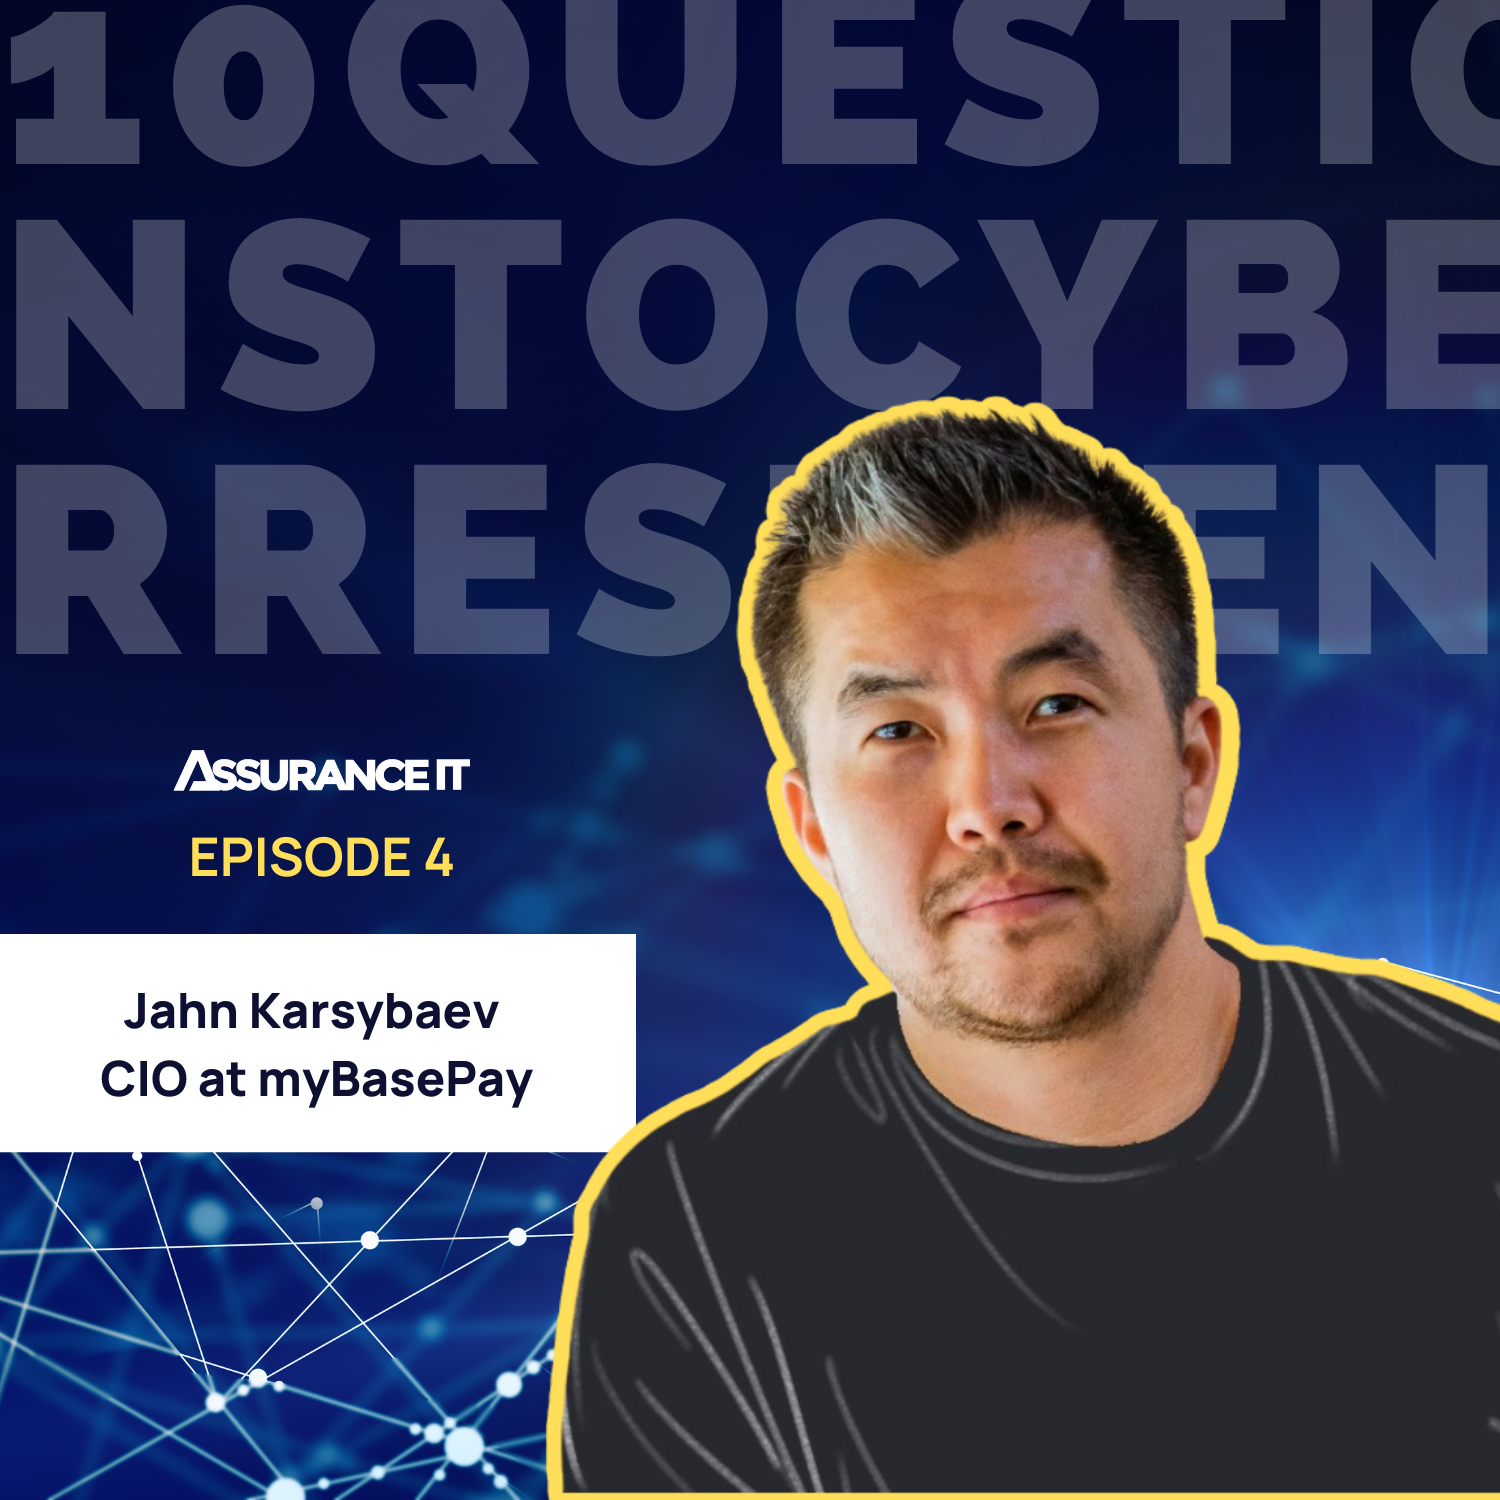 Artwork for podcast 10 Questions to Cyber Resilience